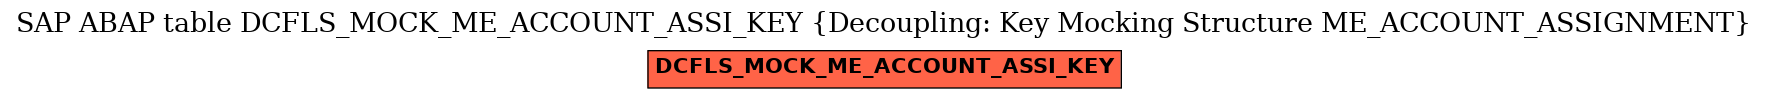 E-R Diagram for table DCFLS_MOCK_ME_ACCOUNT_ASSI_KEY (Decoupling: Key Mocking Structure ME_ACCOUNT_ASSIGNMENT)